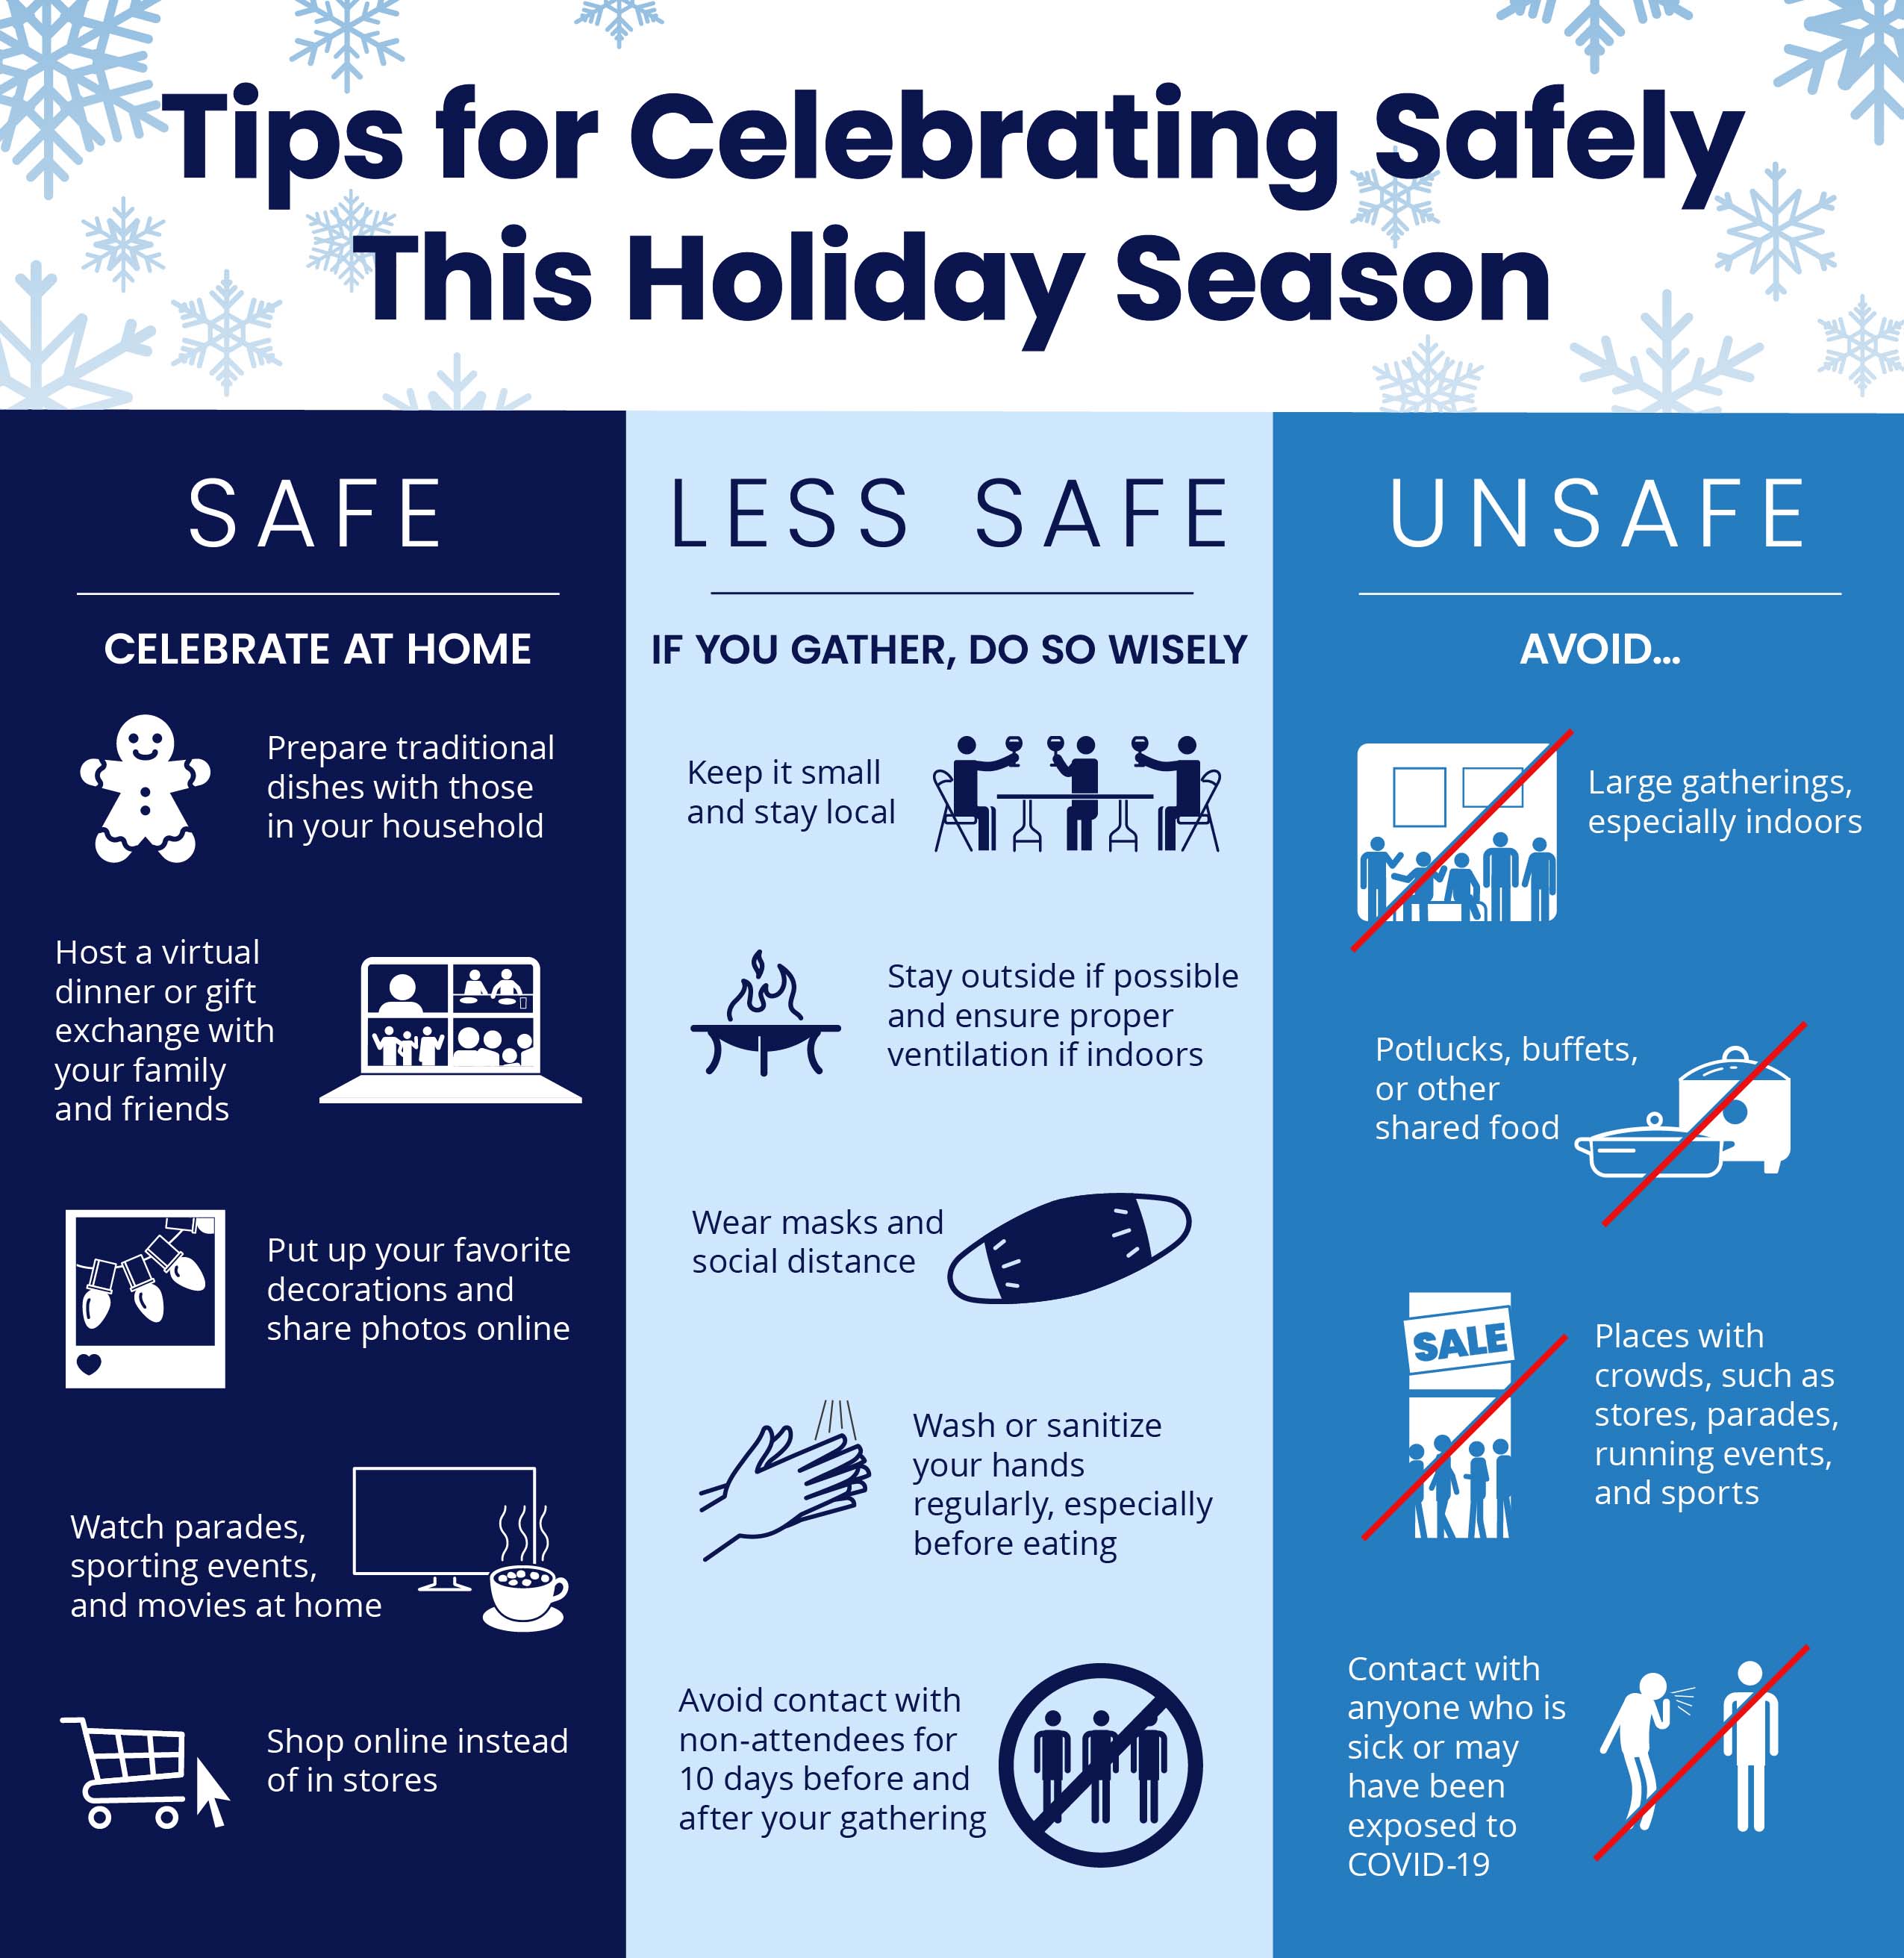 7 Tips to Stay Healthy During Holiday Gatherings